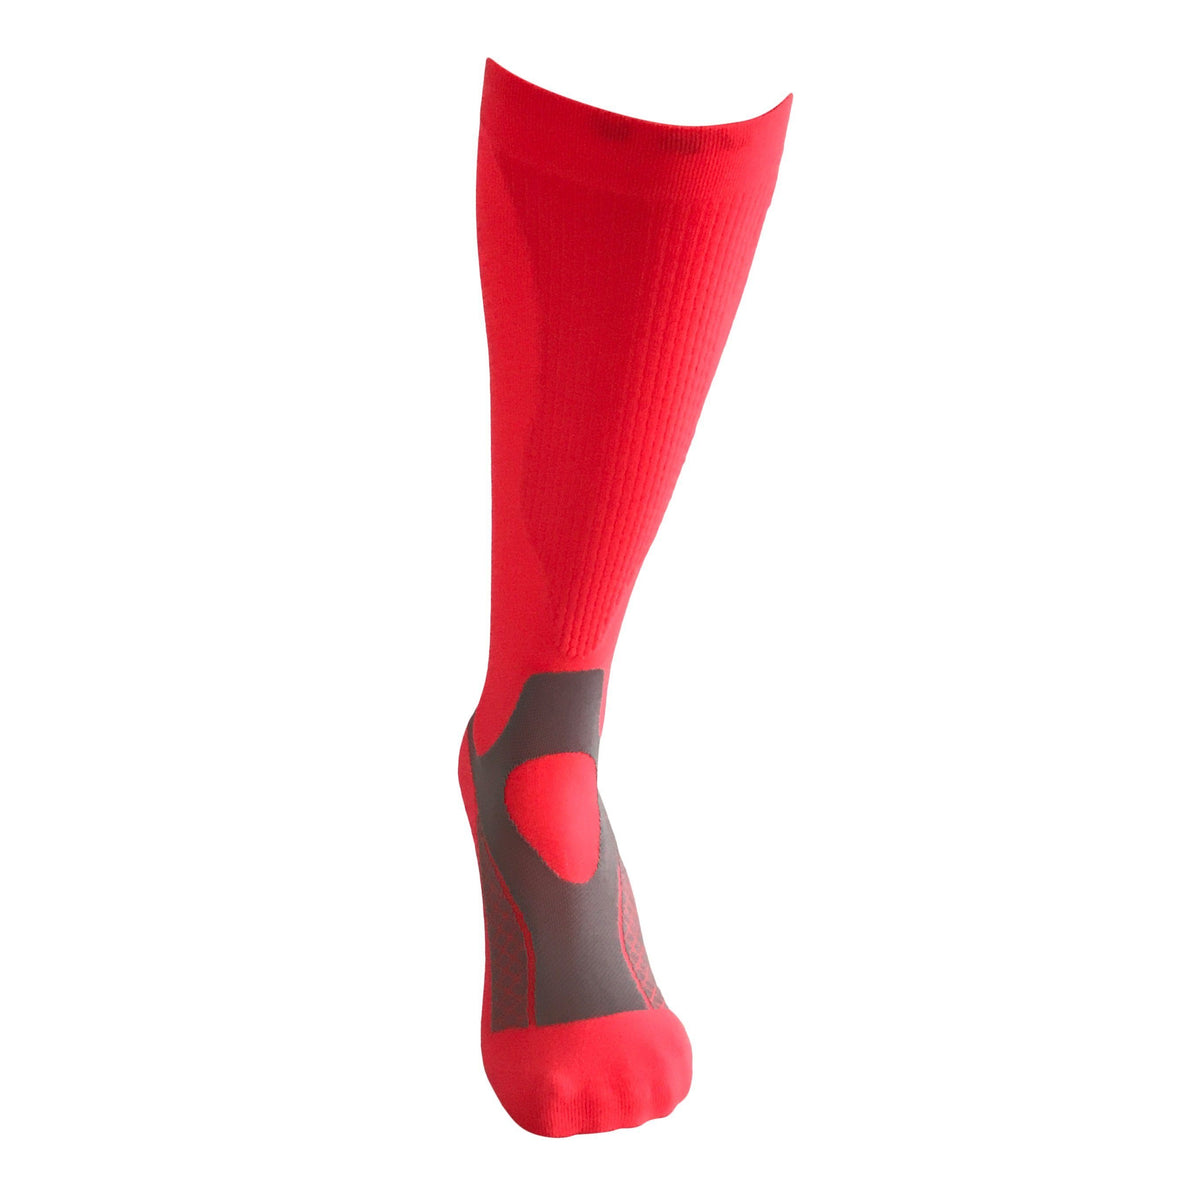 Sheer Open Toe Compression Socks With Wide Top Band